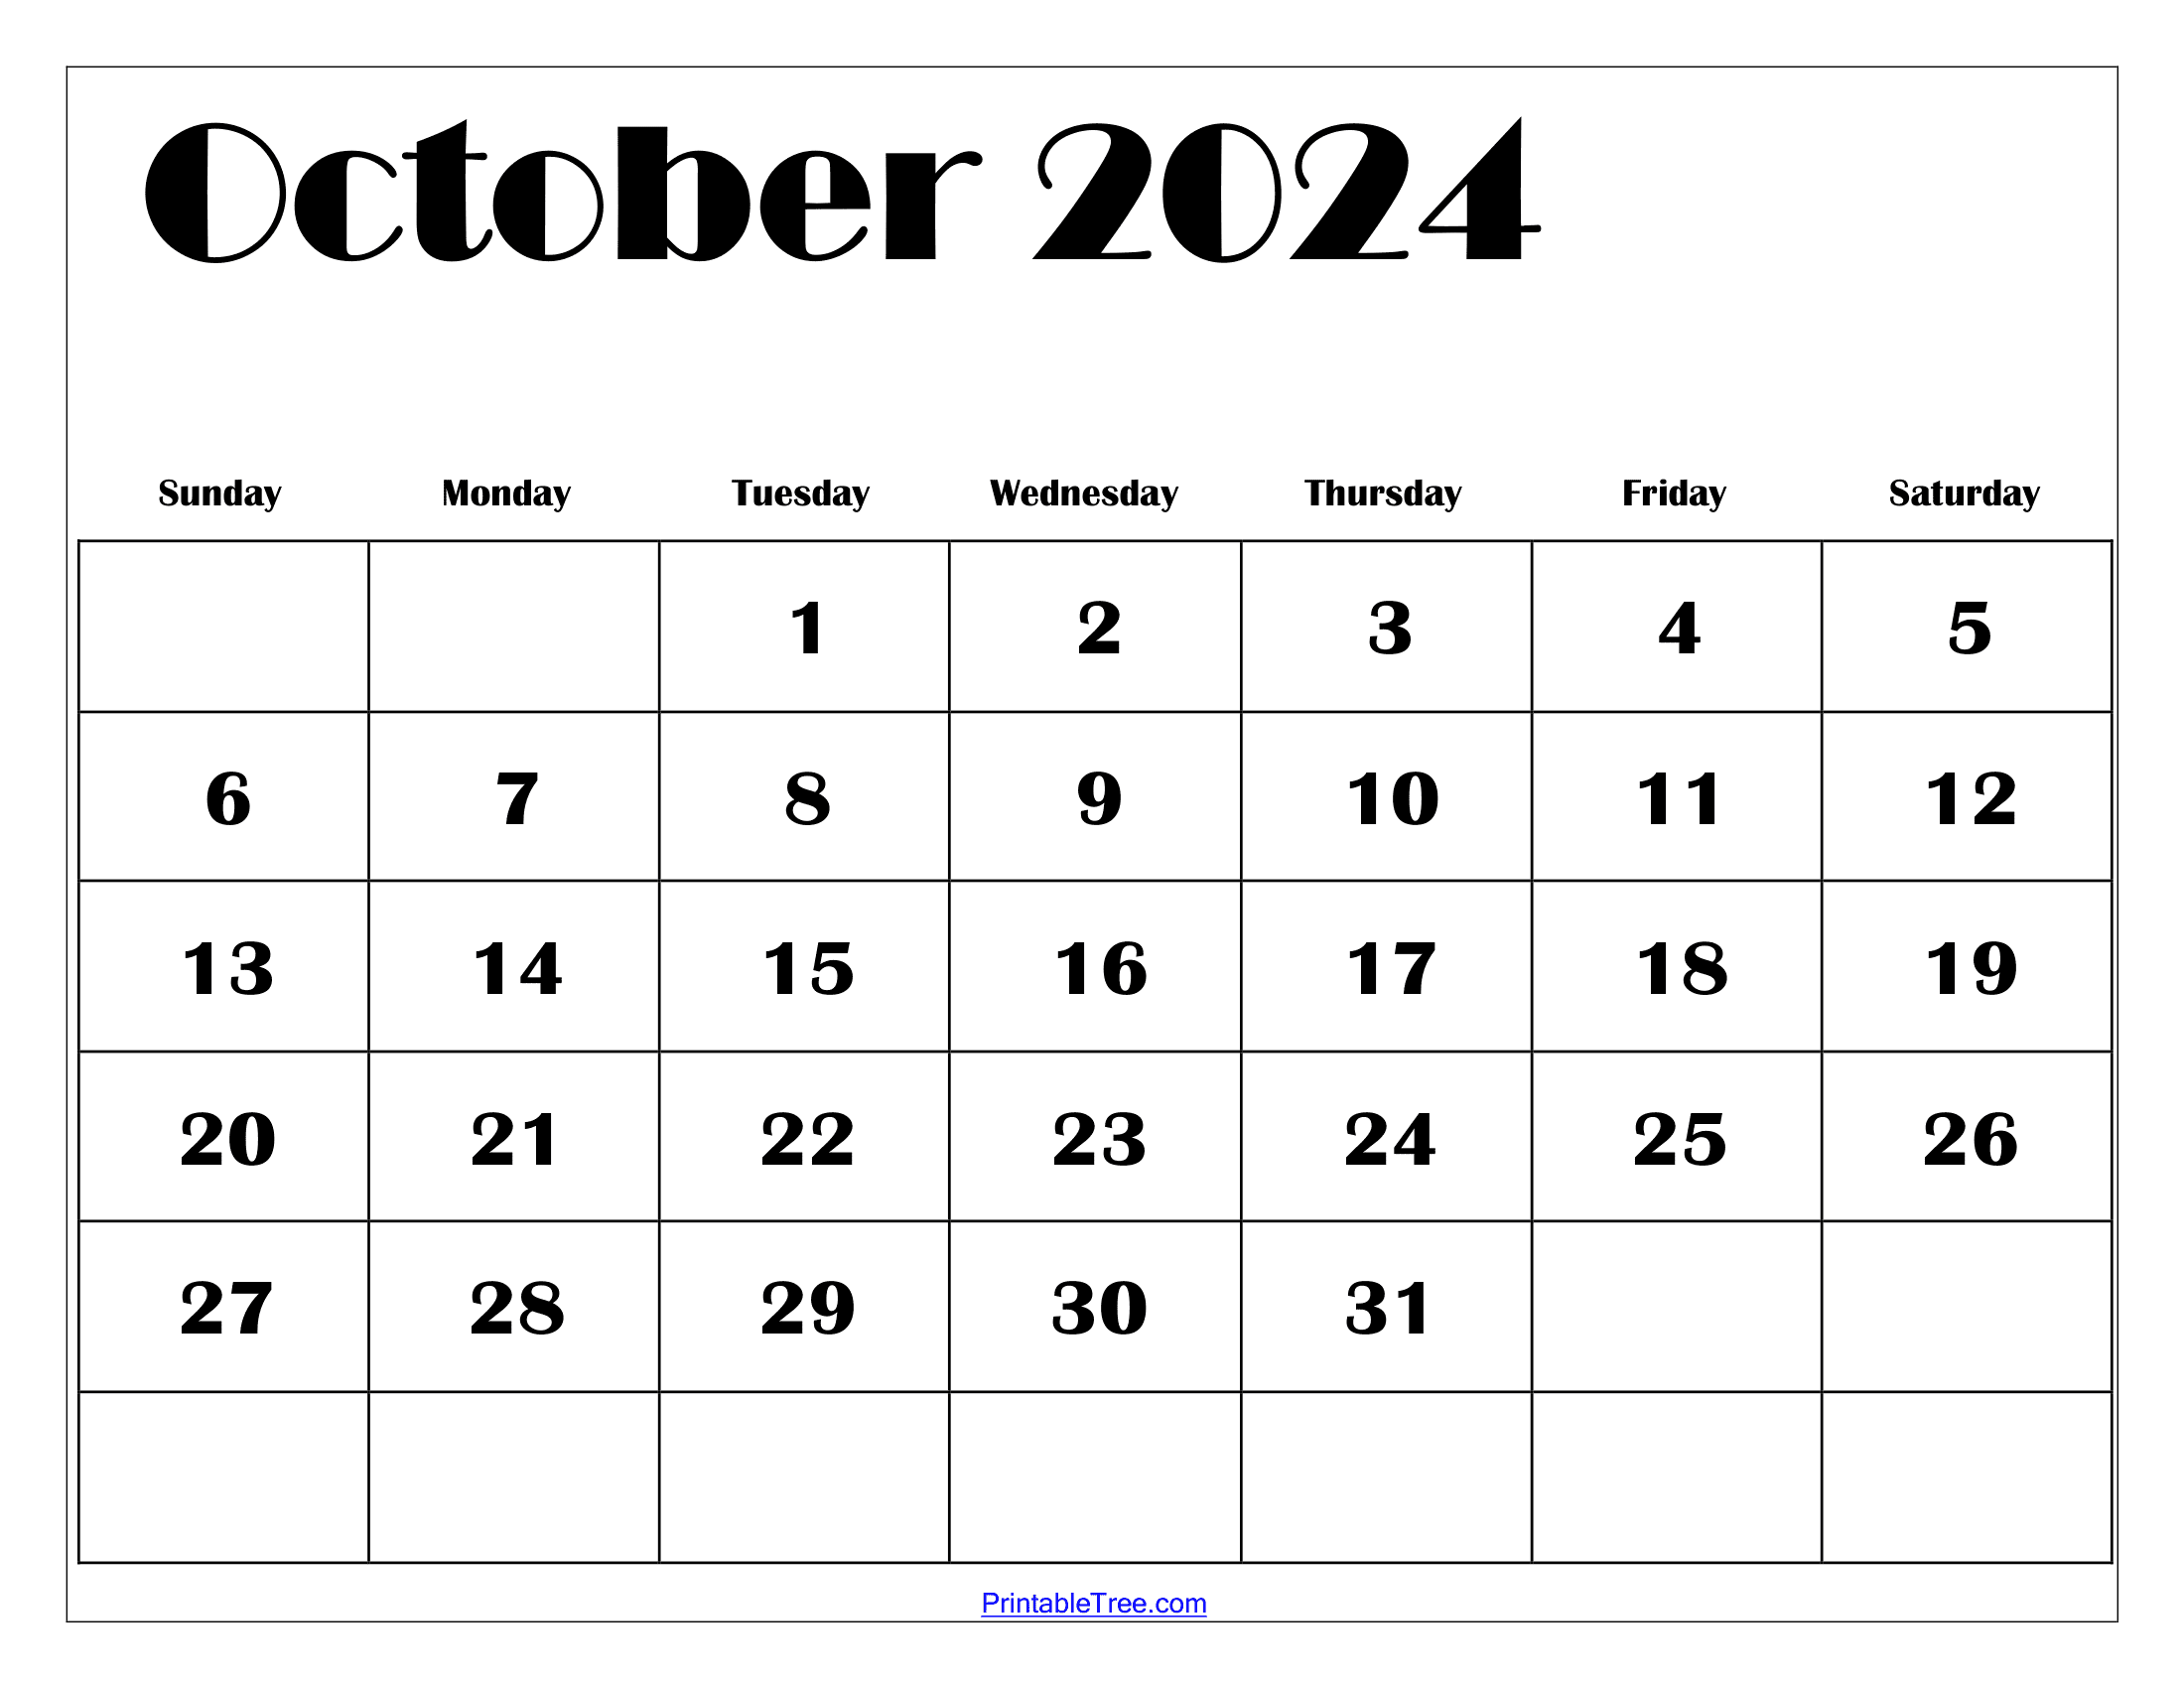 October 2024 Calendar Printable Pdf Free Templates With Holidays for Printable Monthly Calendar October 2024